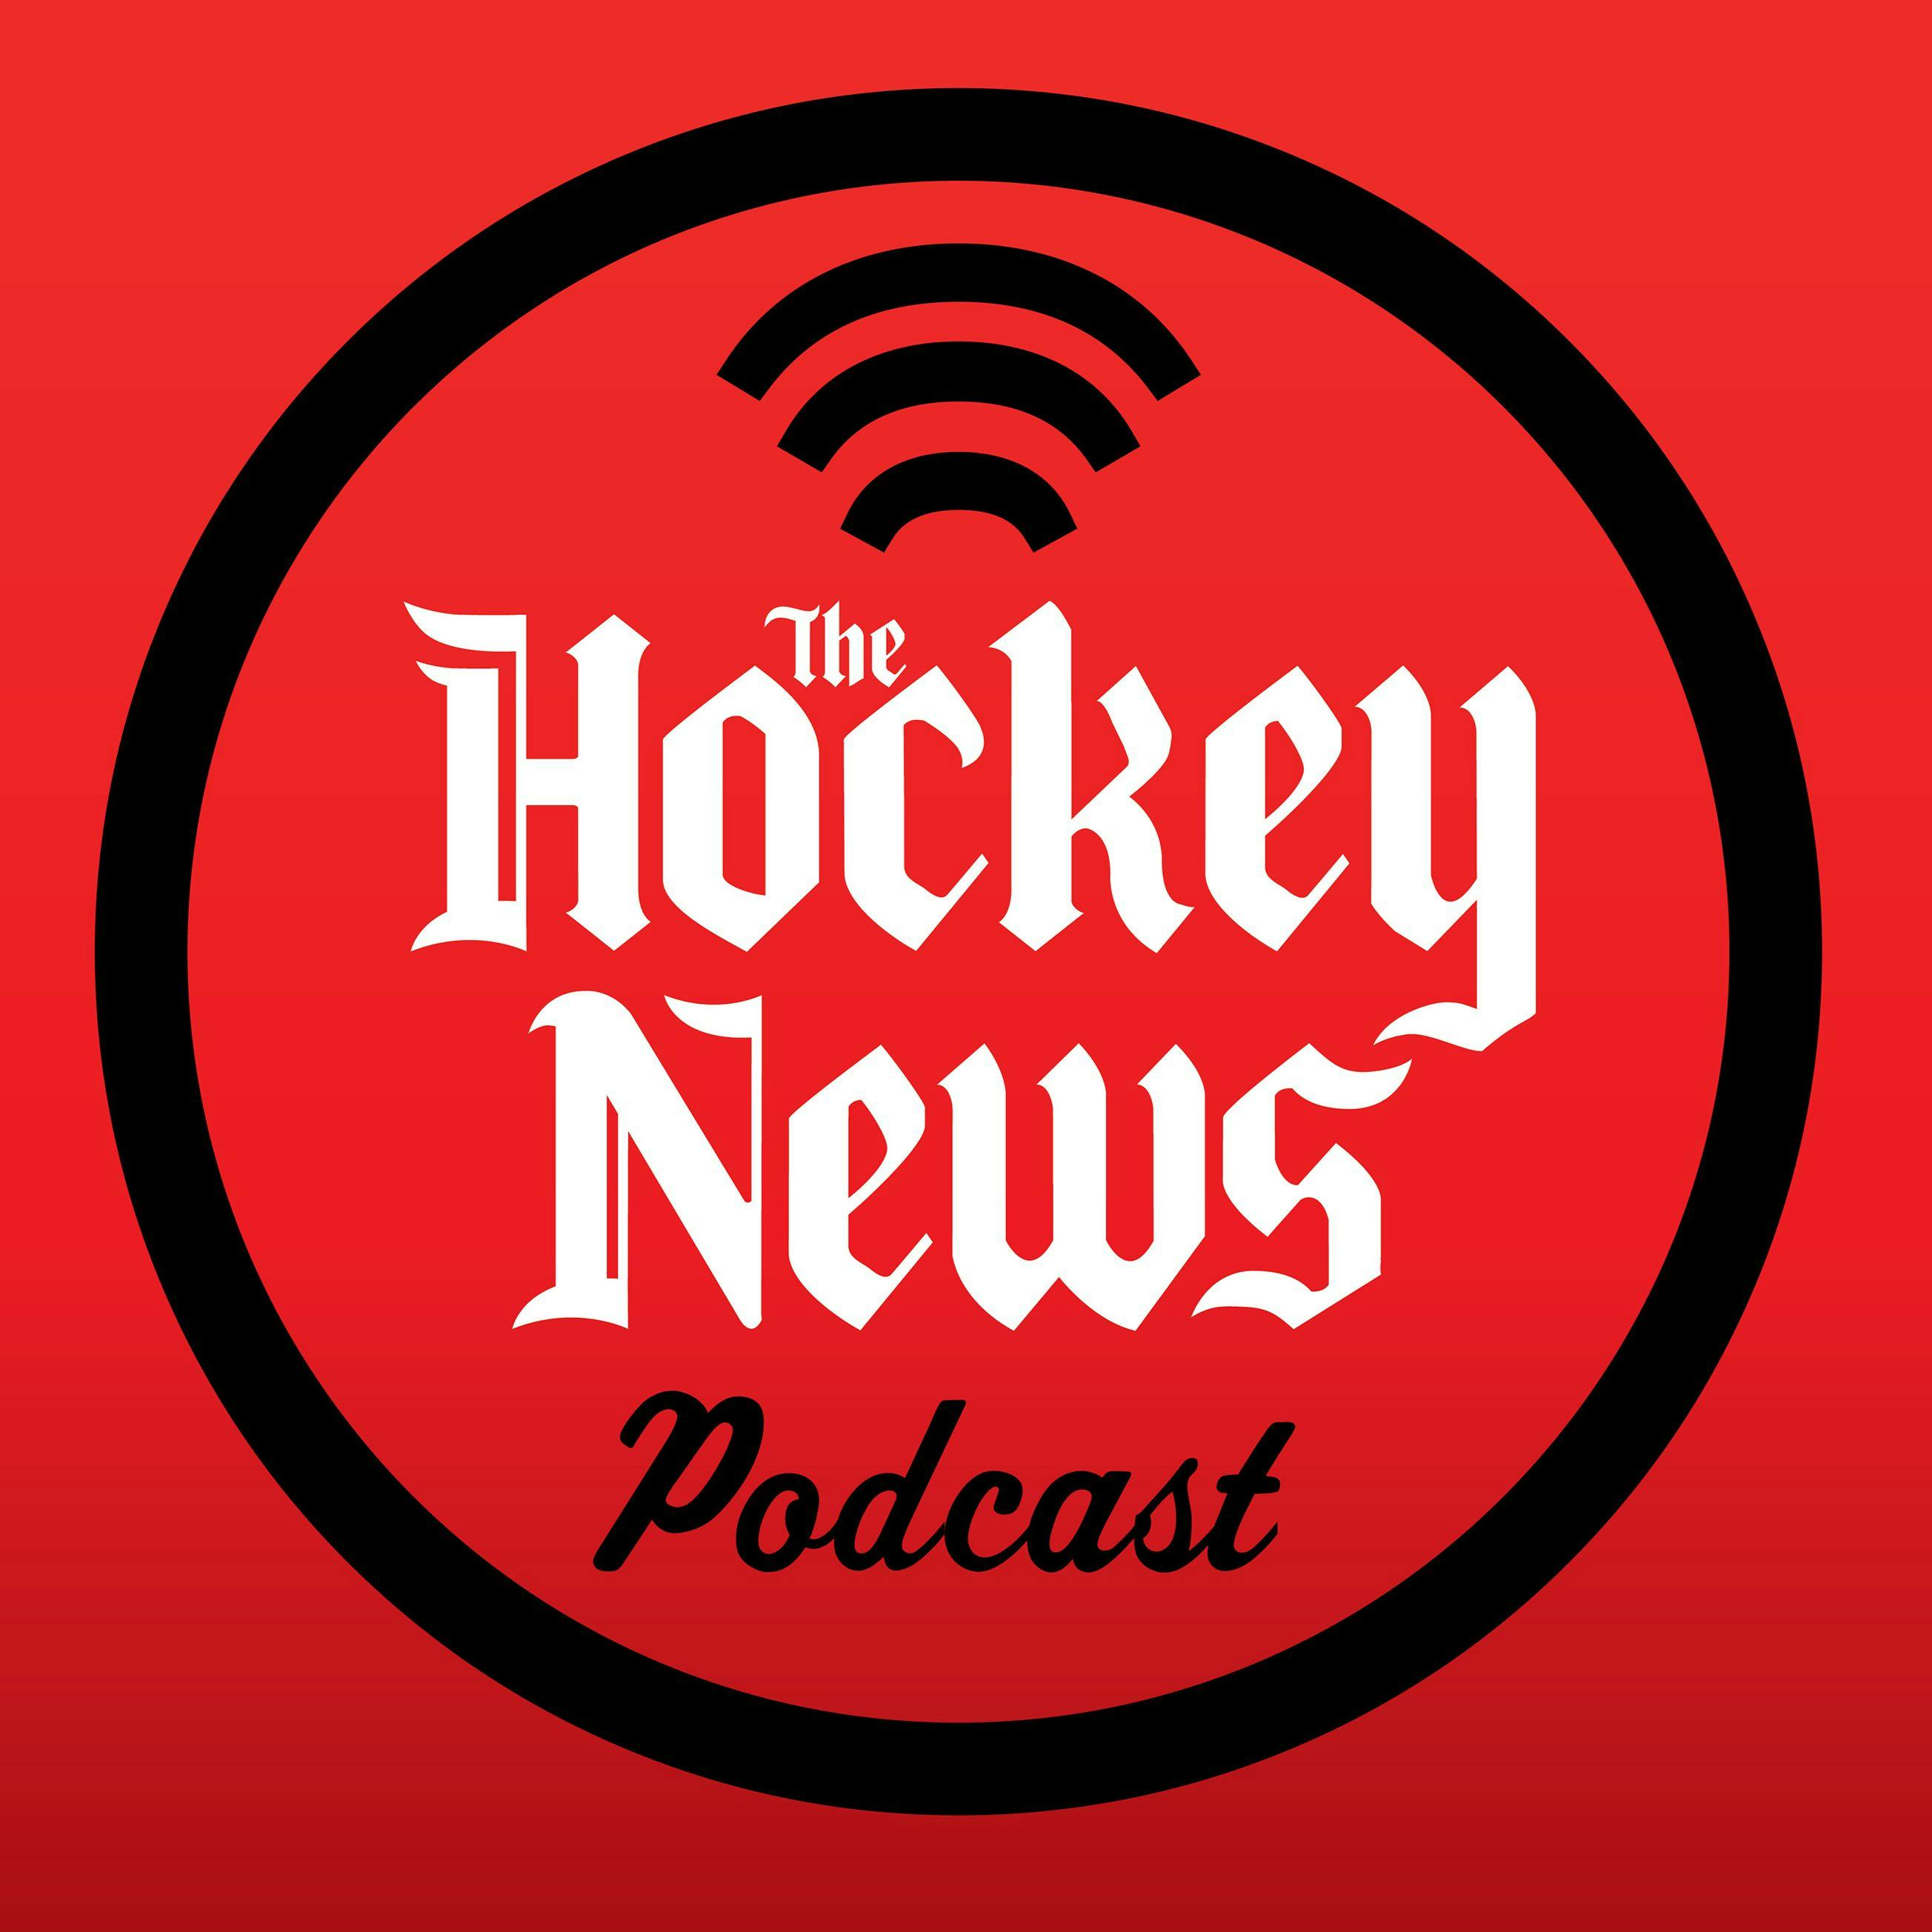 The Hockey News Podcast: How Post-Pushing Affects Reffing